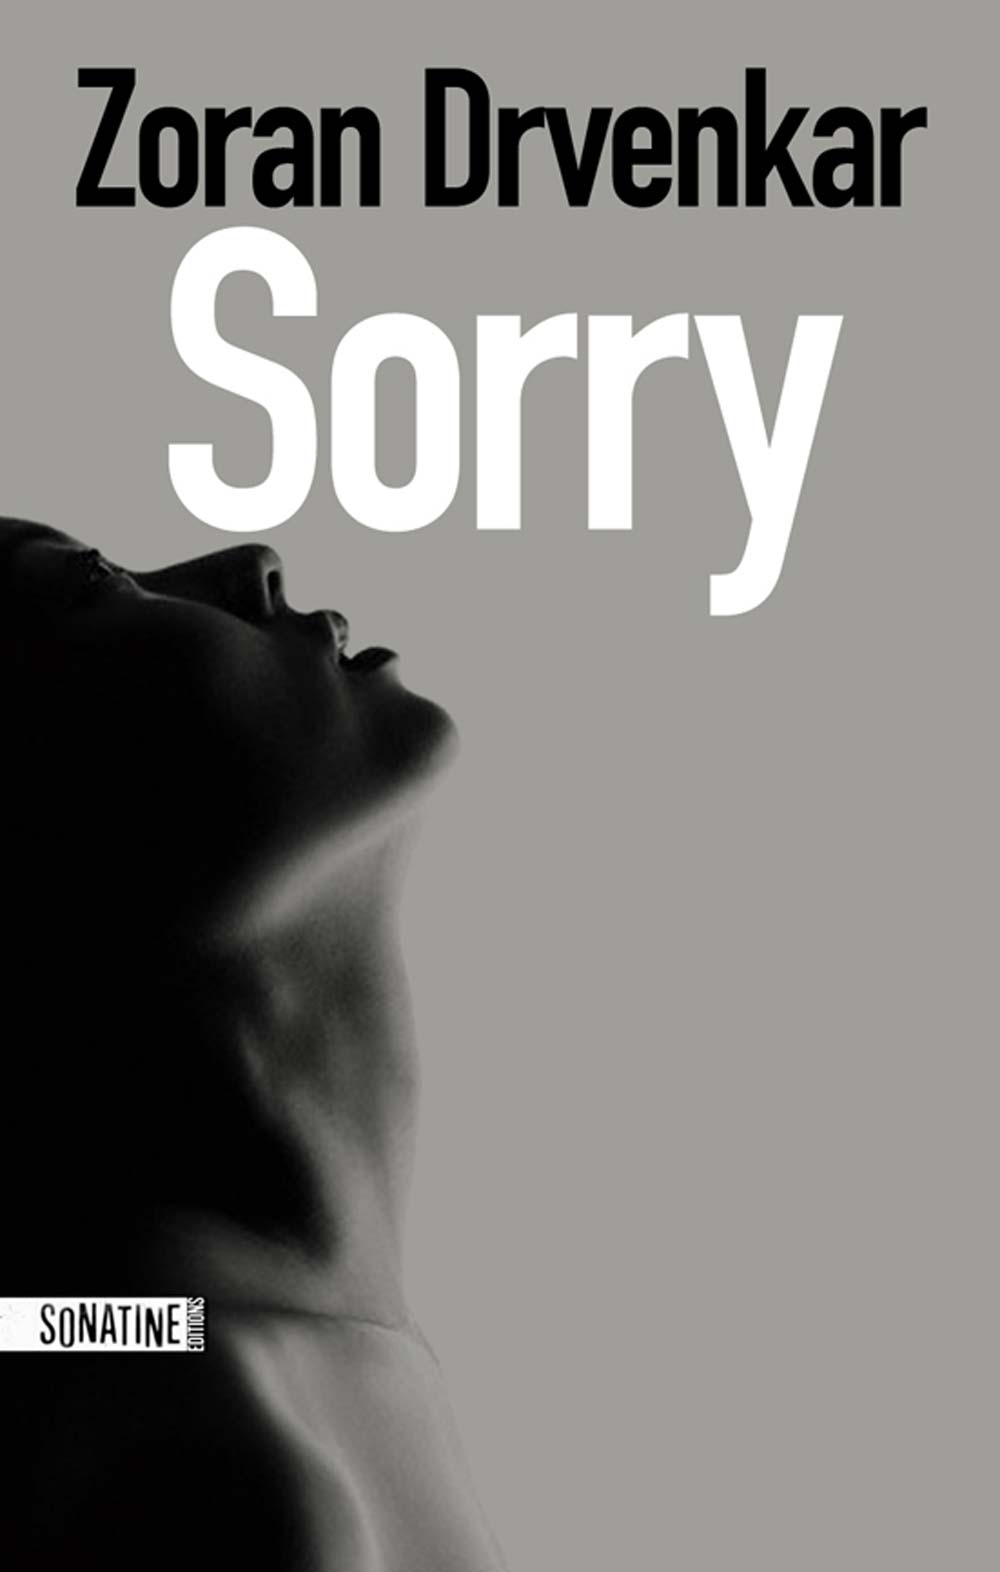 Couverture Sorry